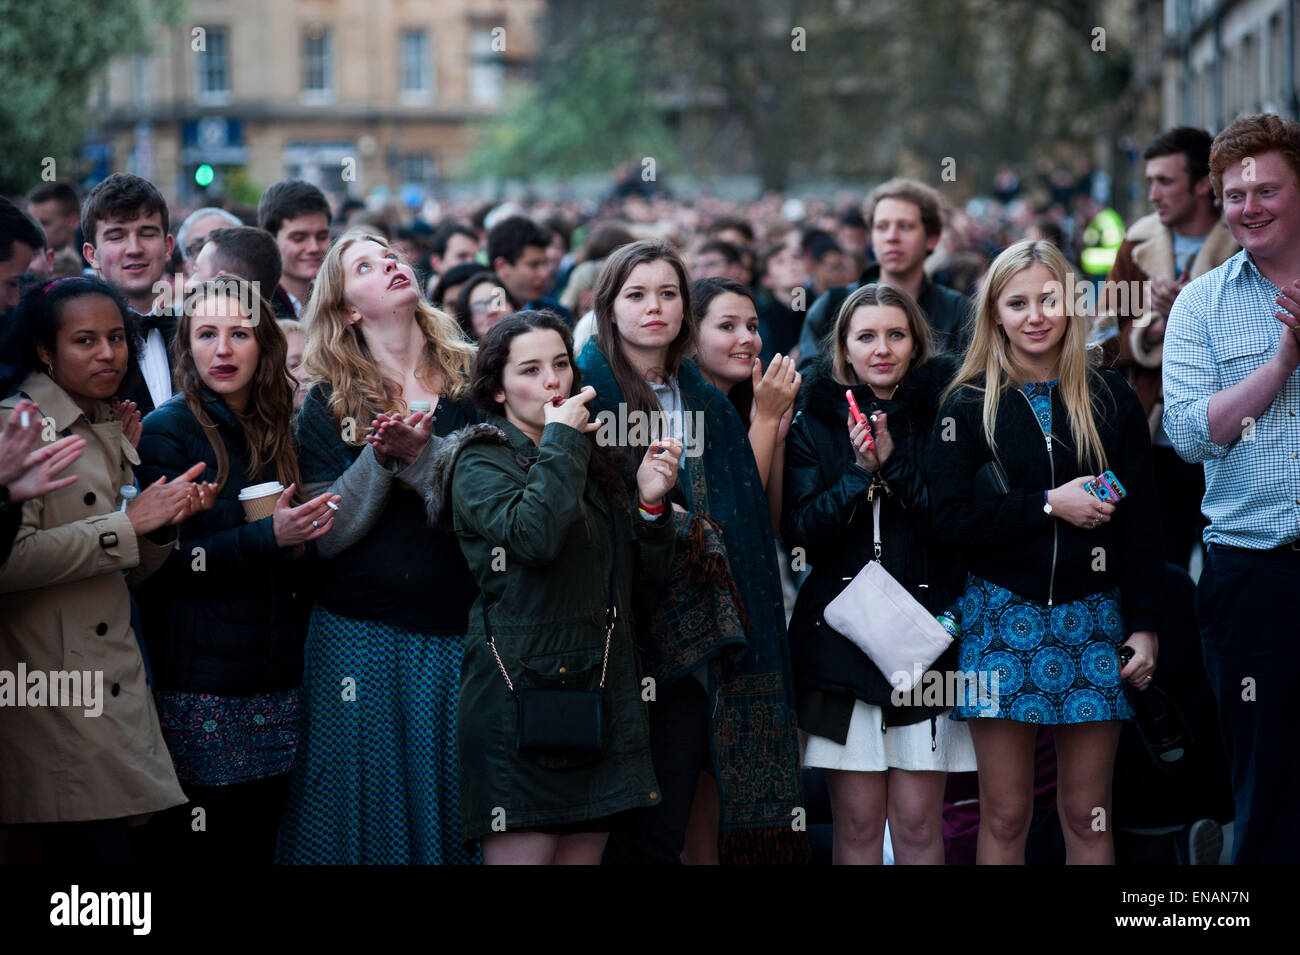 Revellers celebrate Mayday in Oxford. Choristers of Magdalen College Choir sing the Hymnus Eucharist at 6am Stock Photo